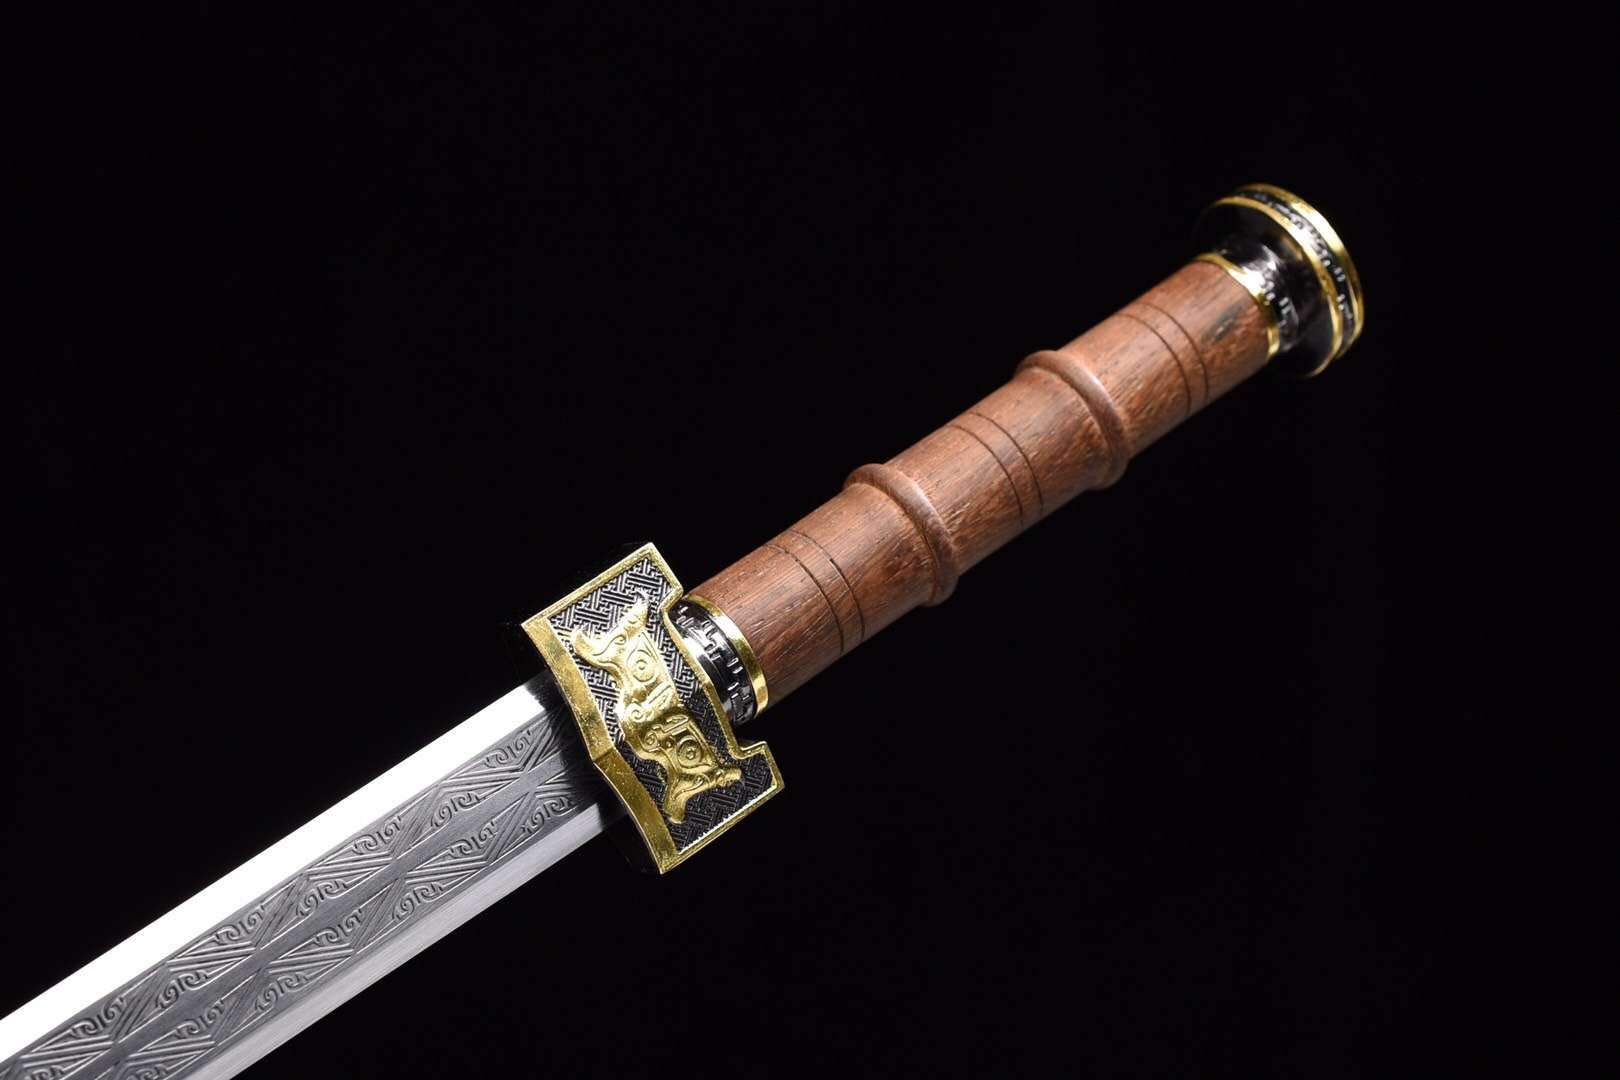 Ruyi dagger sword,High carbon steel etch blade,Alloy fittings - Chinese sword shop